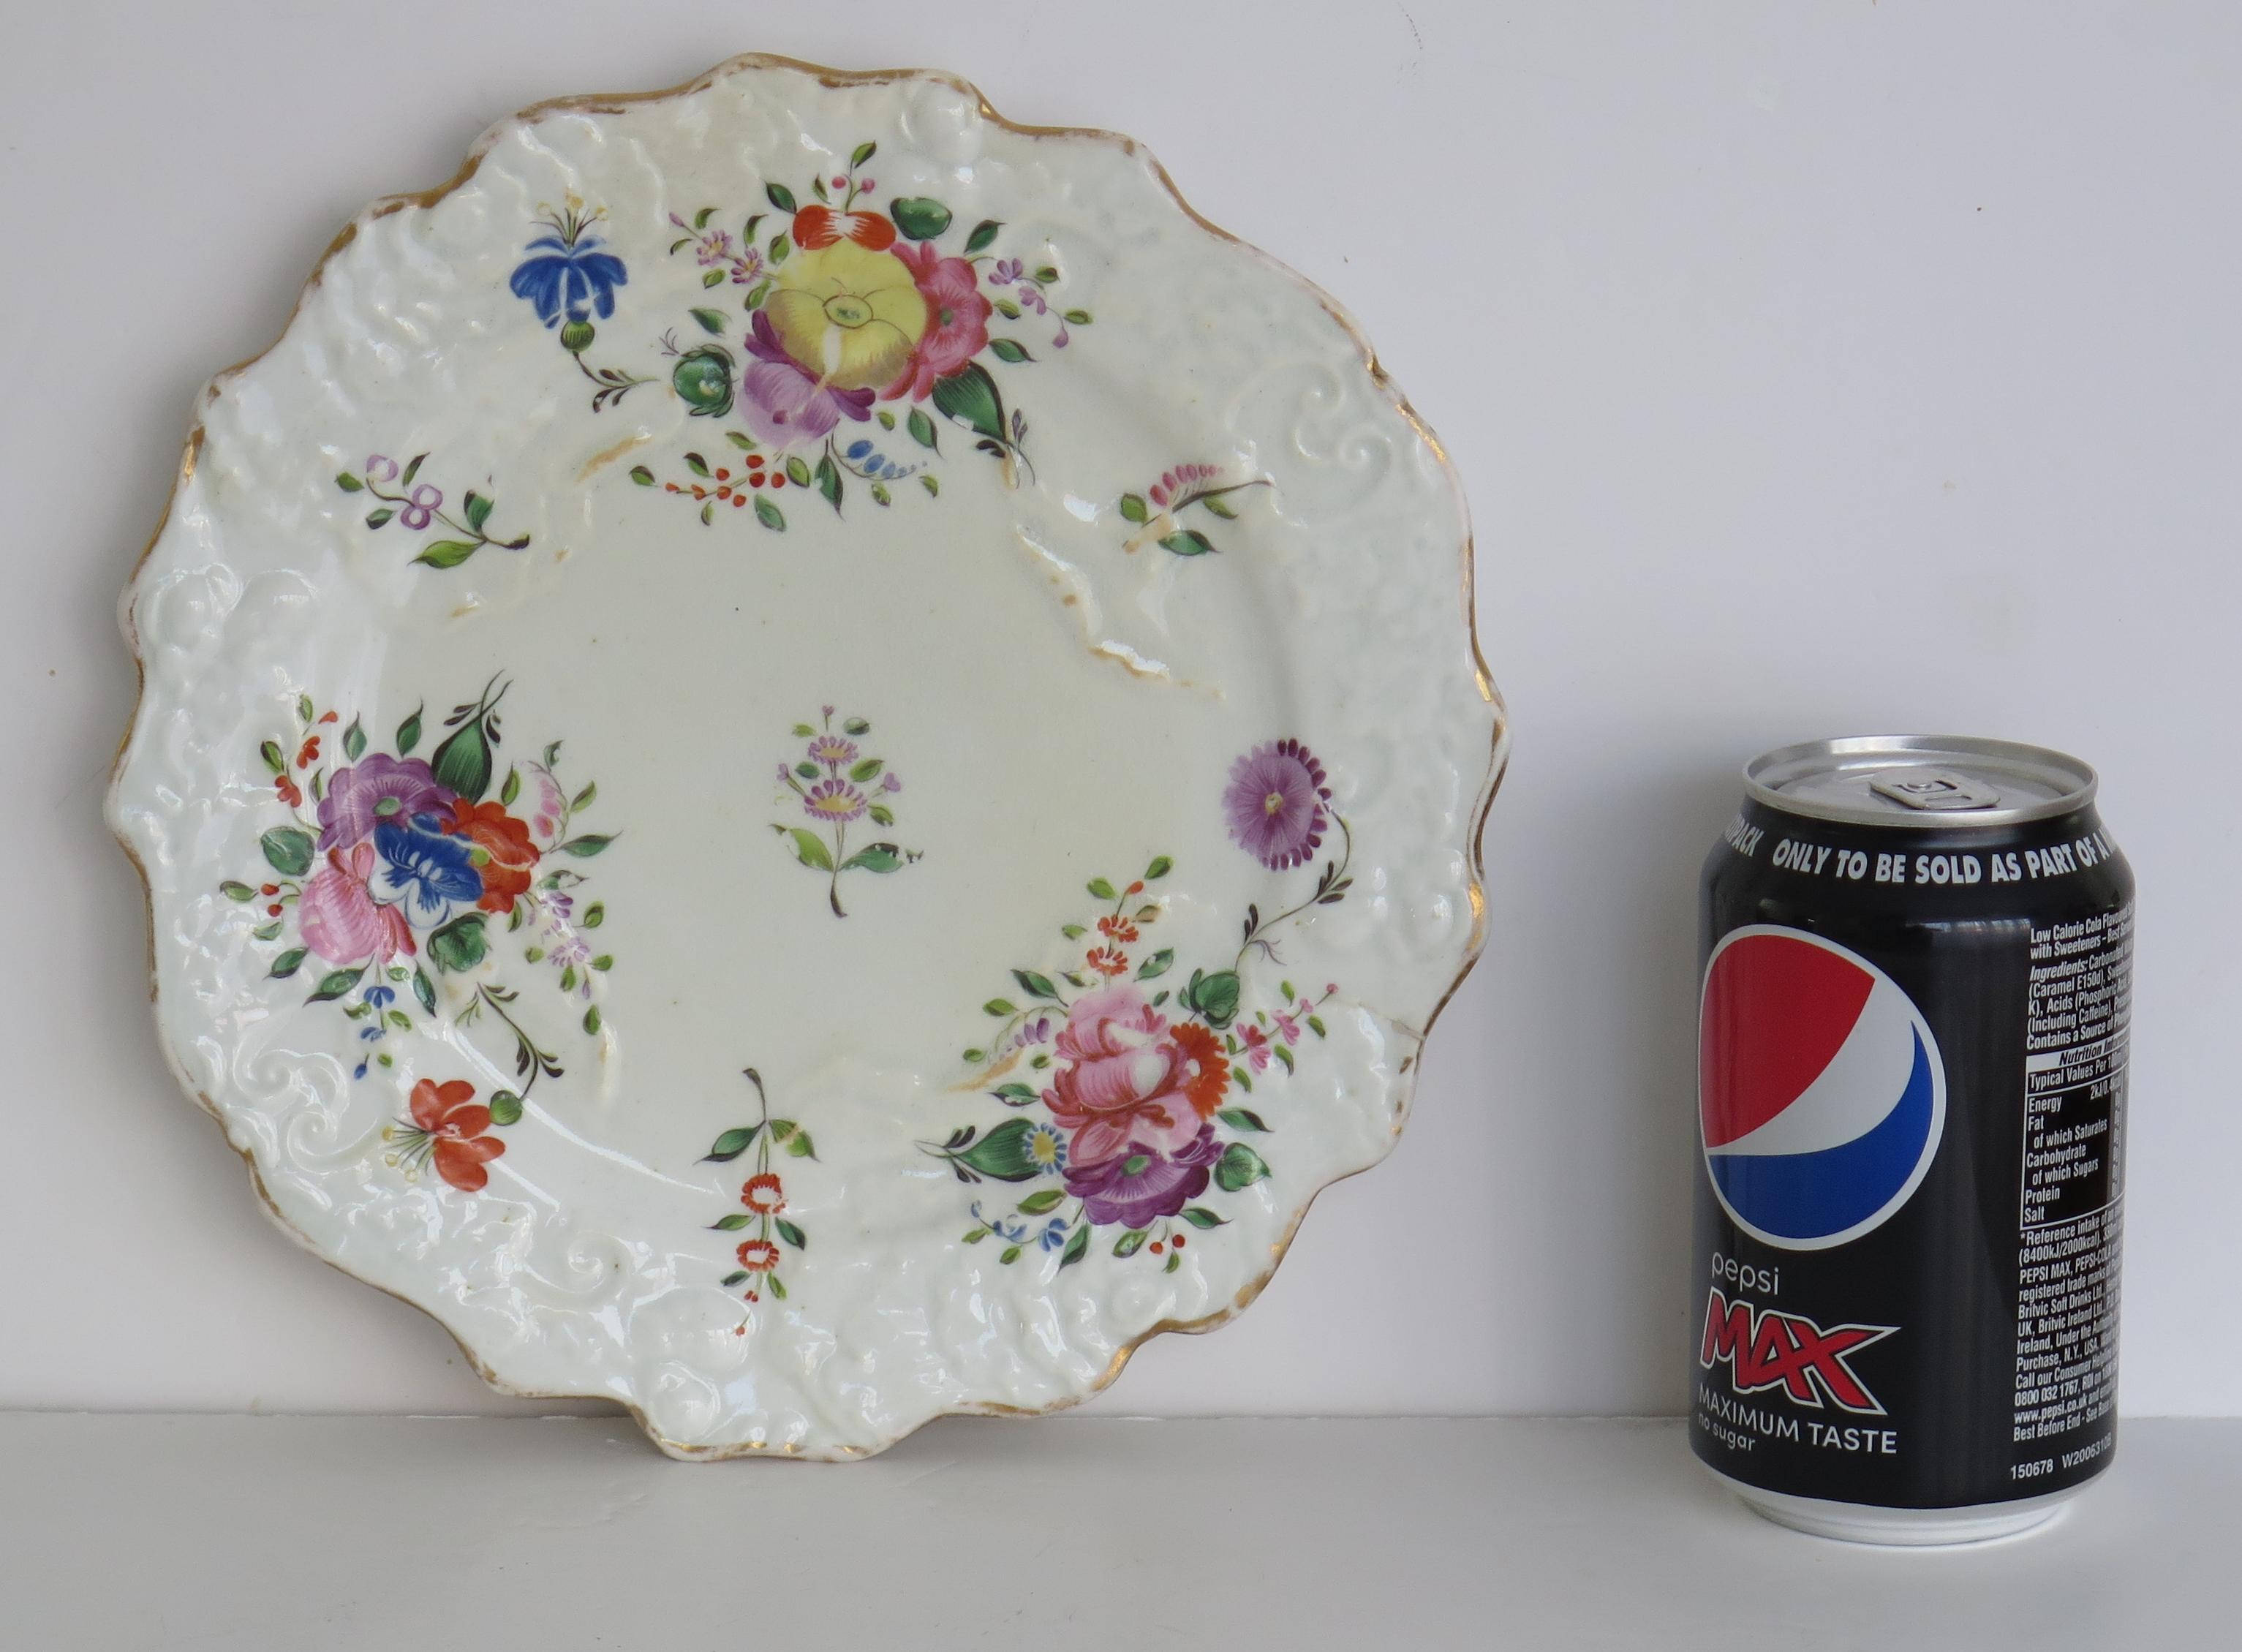 Mason's Porcelain Plate Hand Painted in Central Spray Mixed Border Ptn, Ca 1815 For Sale 7